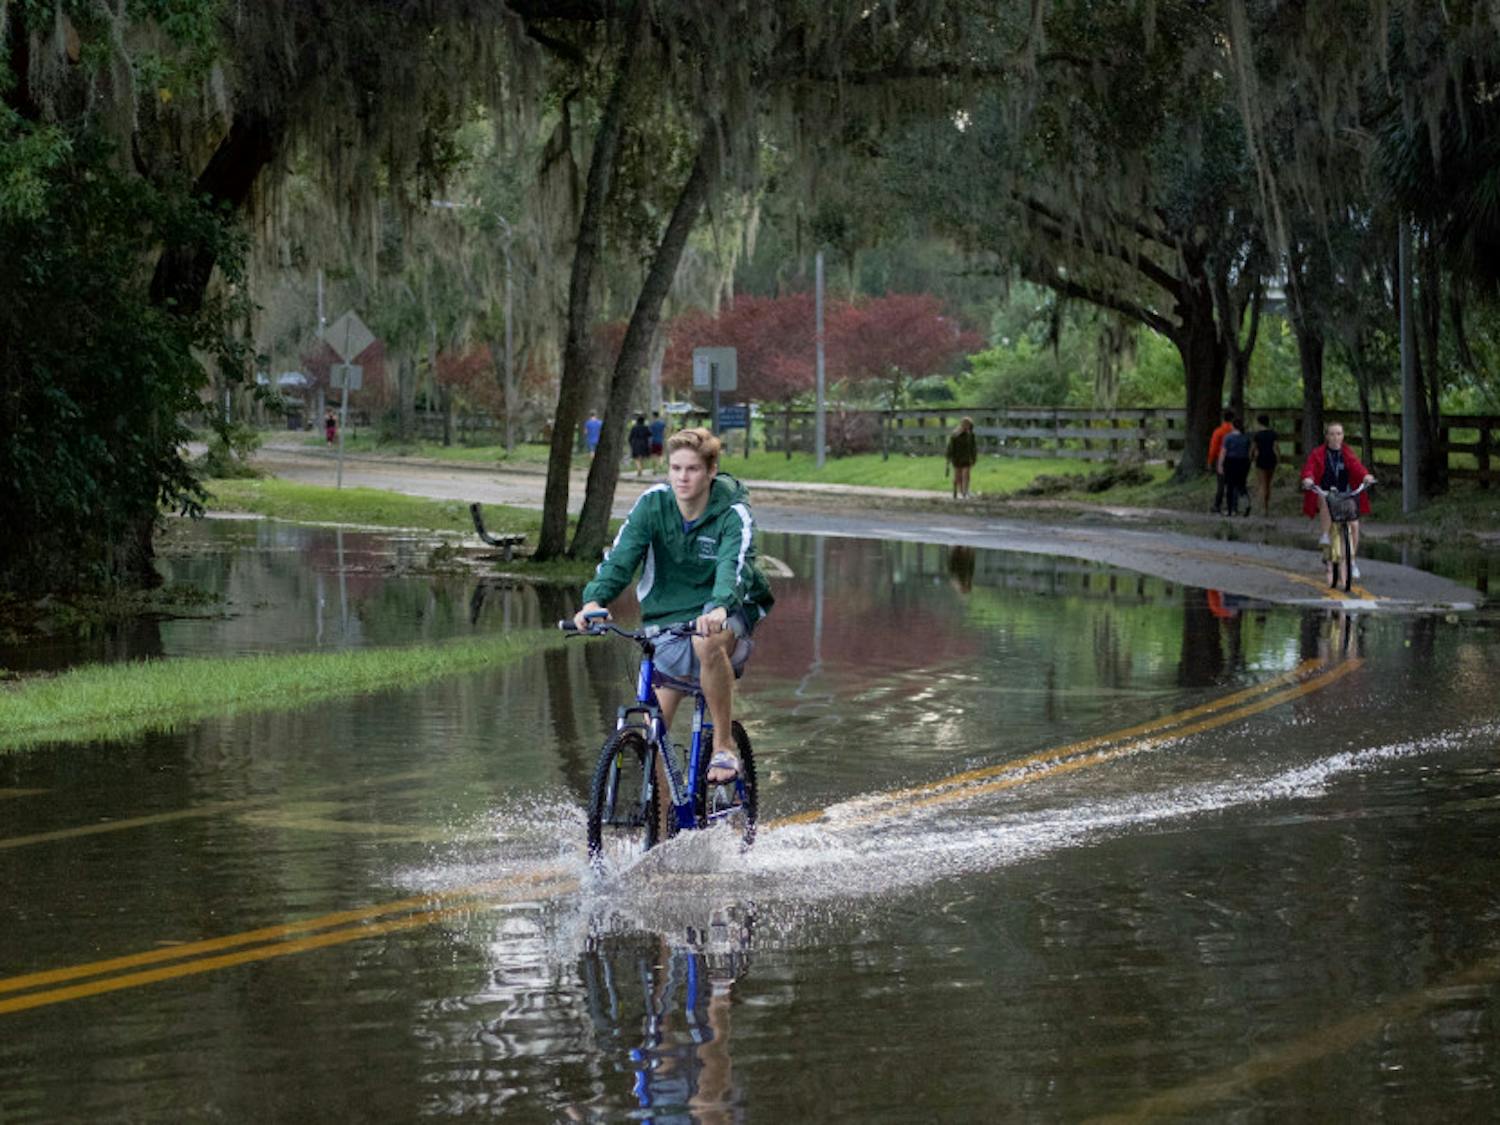 Students ride their bicycles through nearly a foot of water on the streets near Lake Alice. Lake Alice is one of the areas that flooded on campus during Hurricane Irma.